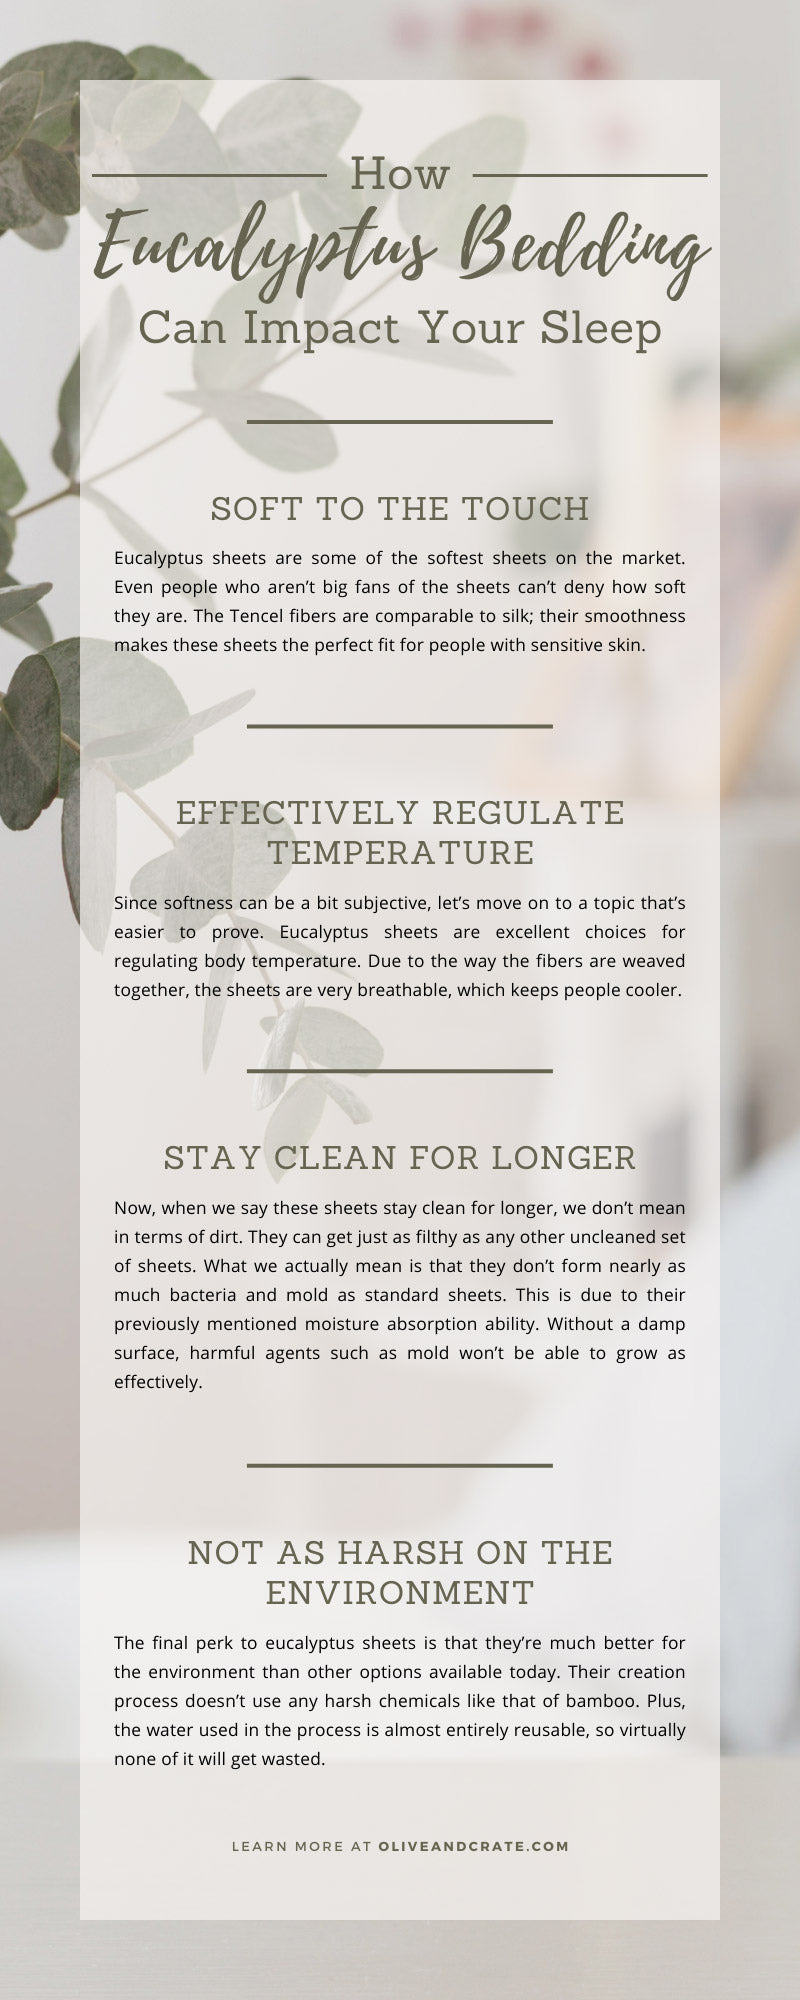 How Eucalyptus Bedding Can Impact Your Sleep - Olive and Crate